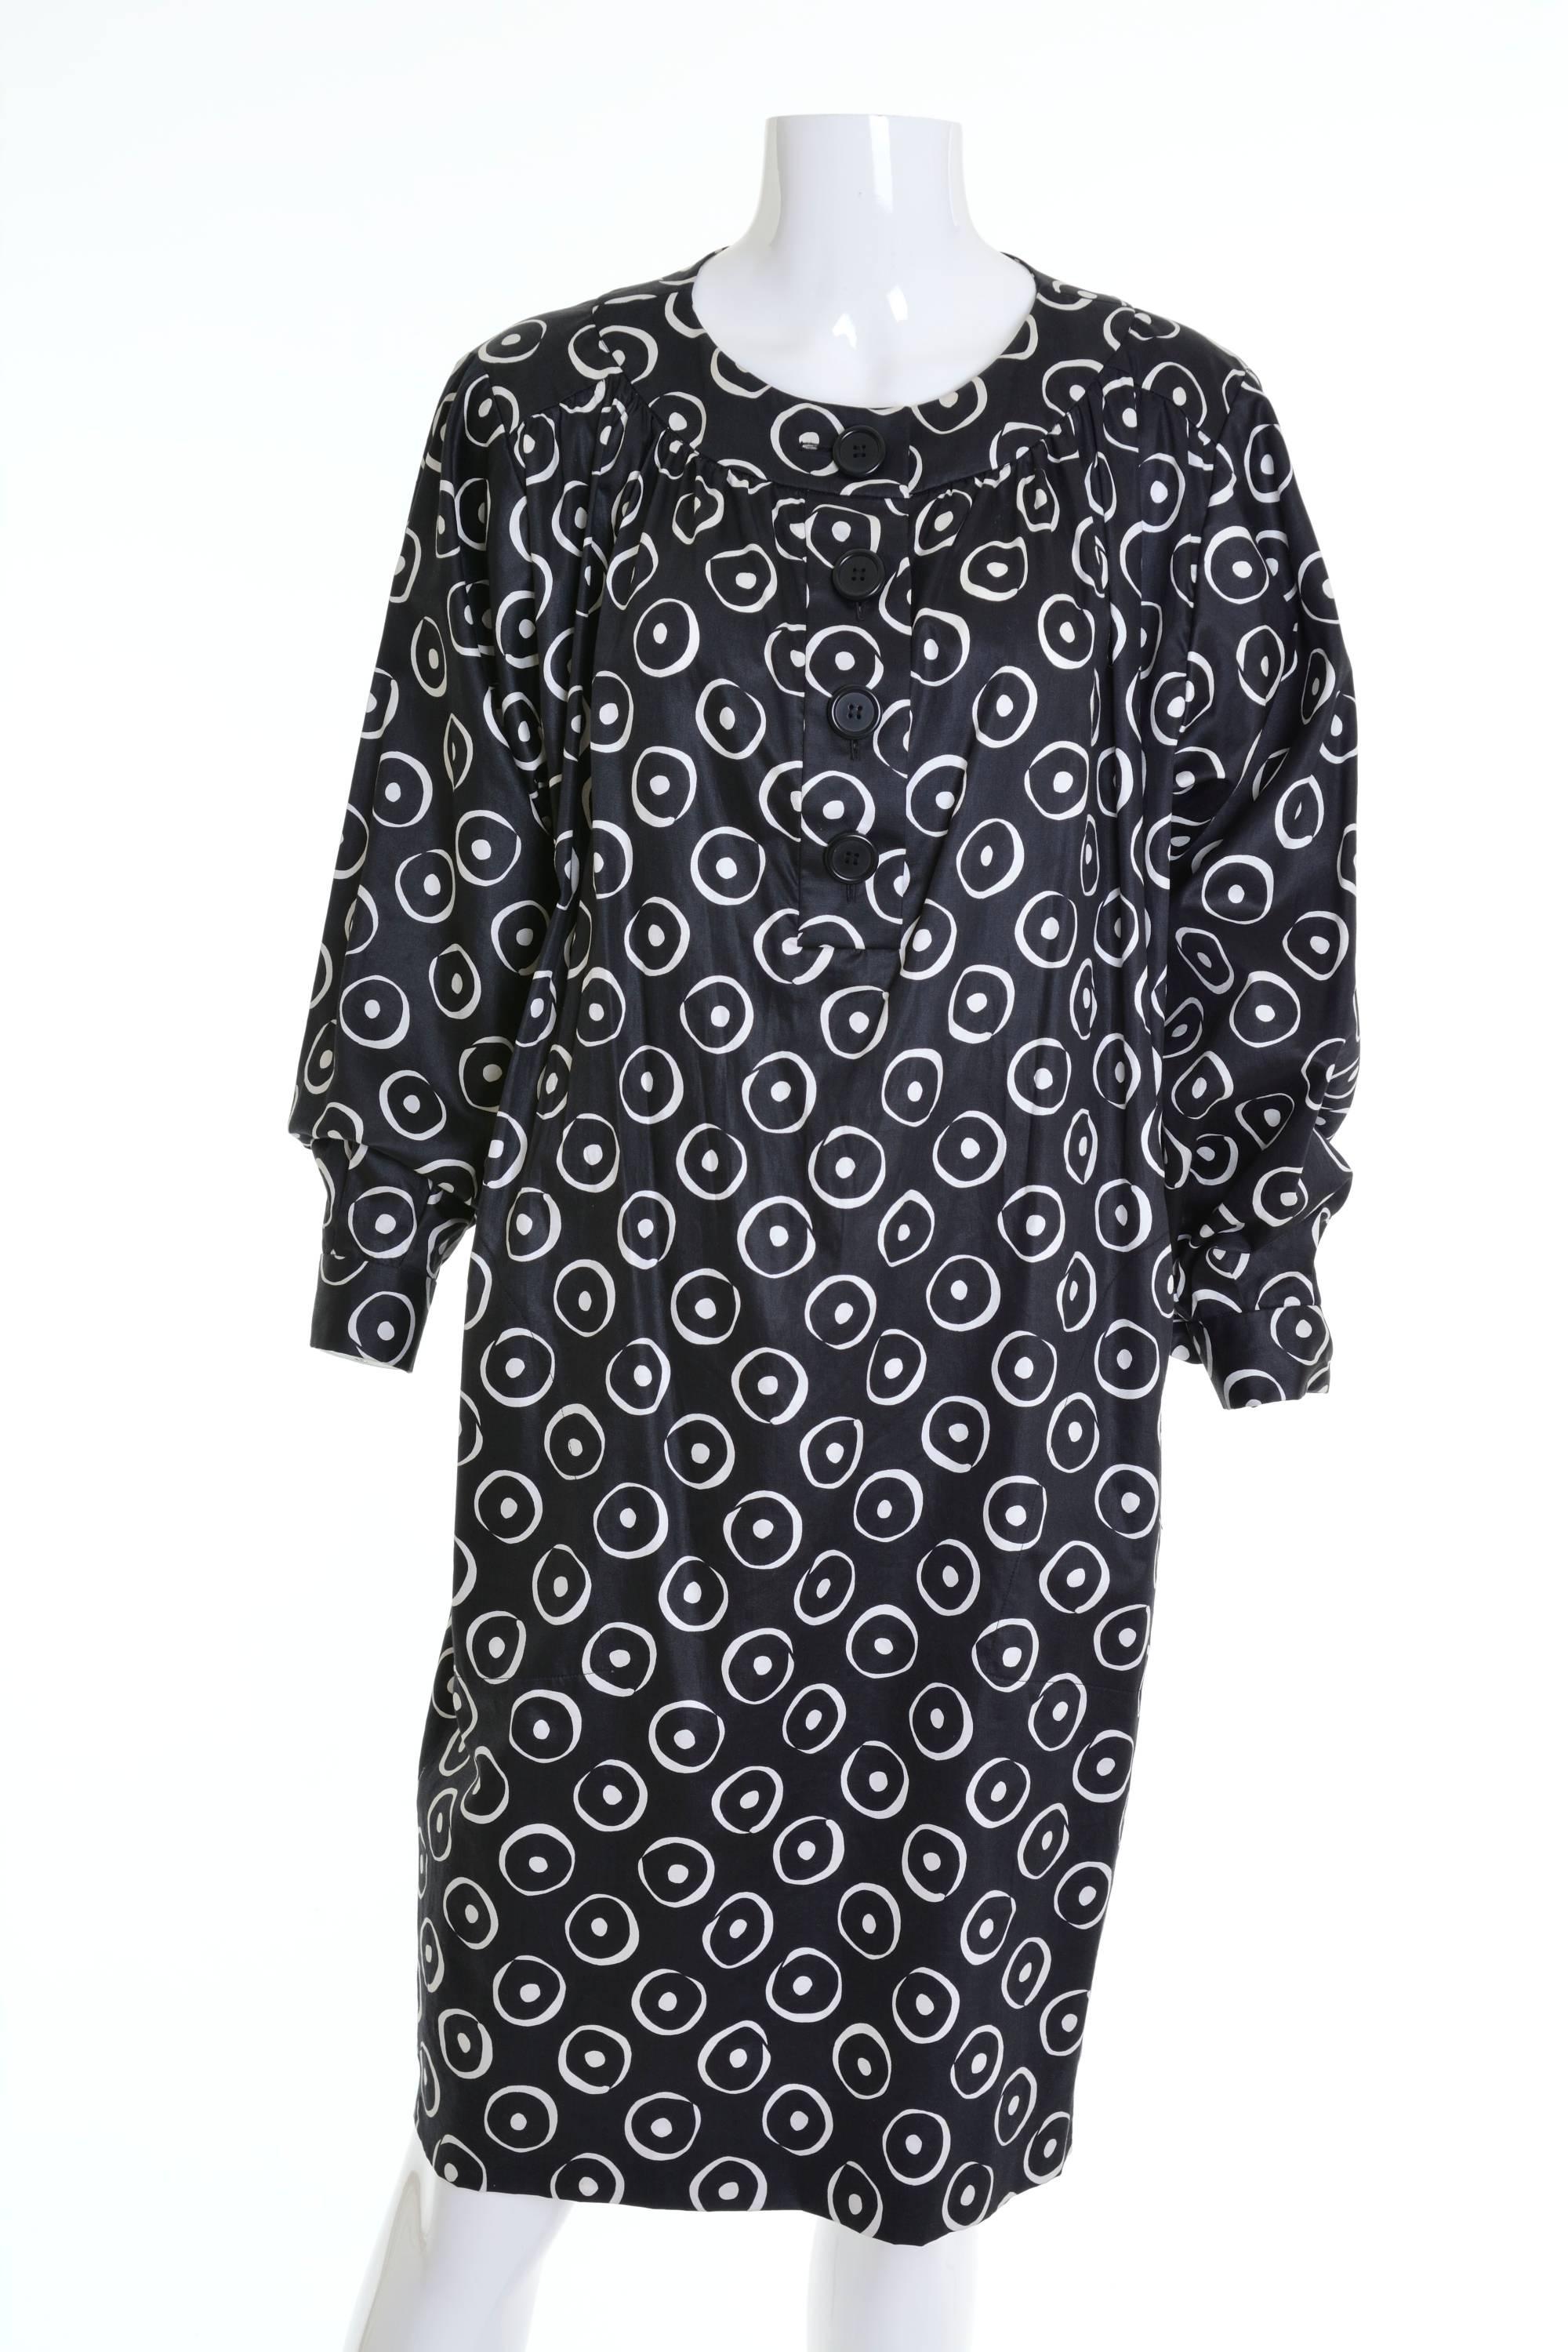 1980s YVES SAINT LAURENT Rive Gauche Black and White Cotton Dress In Excellent Condition For Sale In Milan, Italy